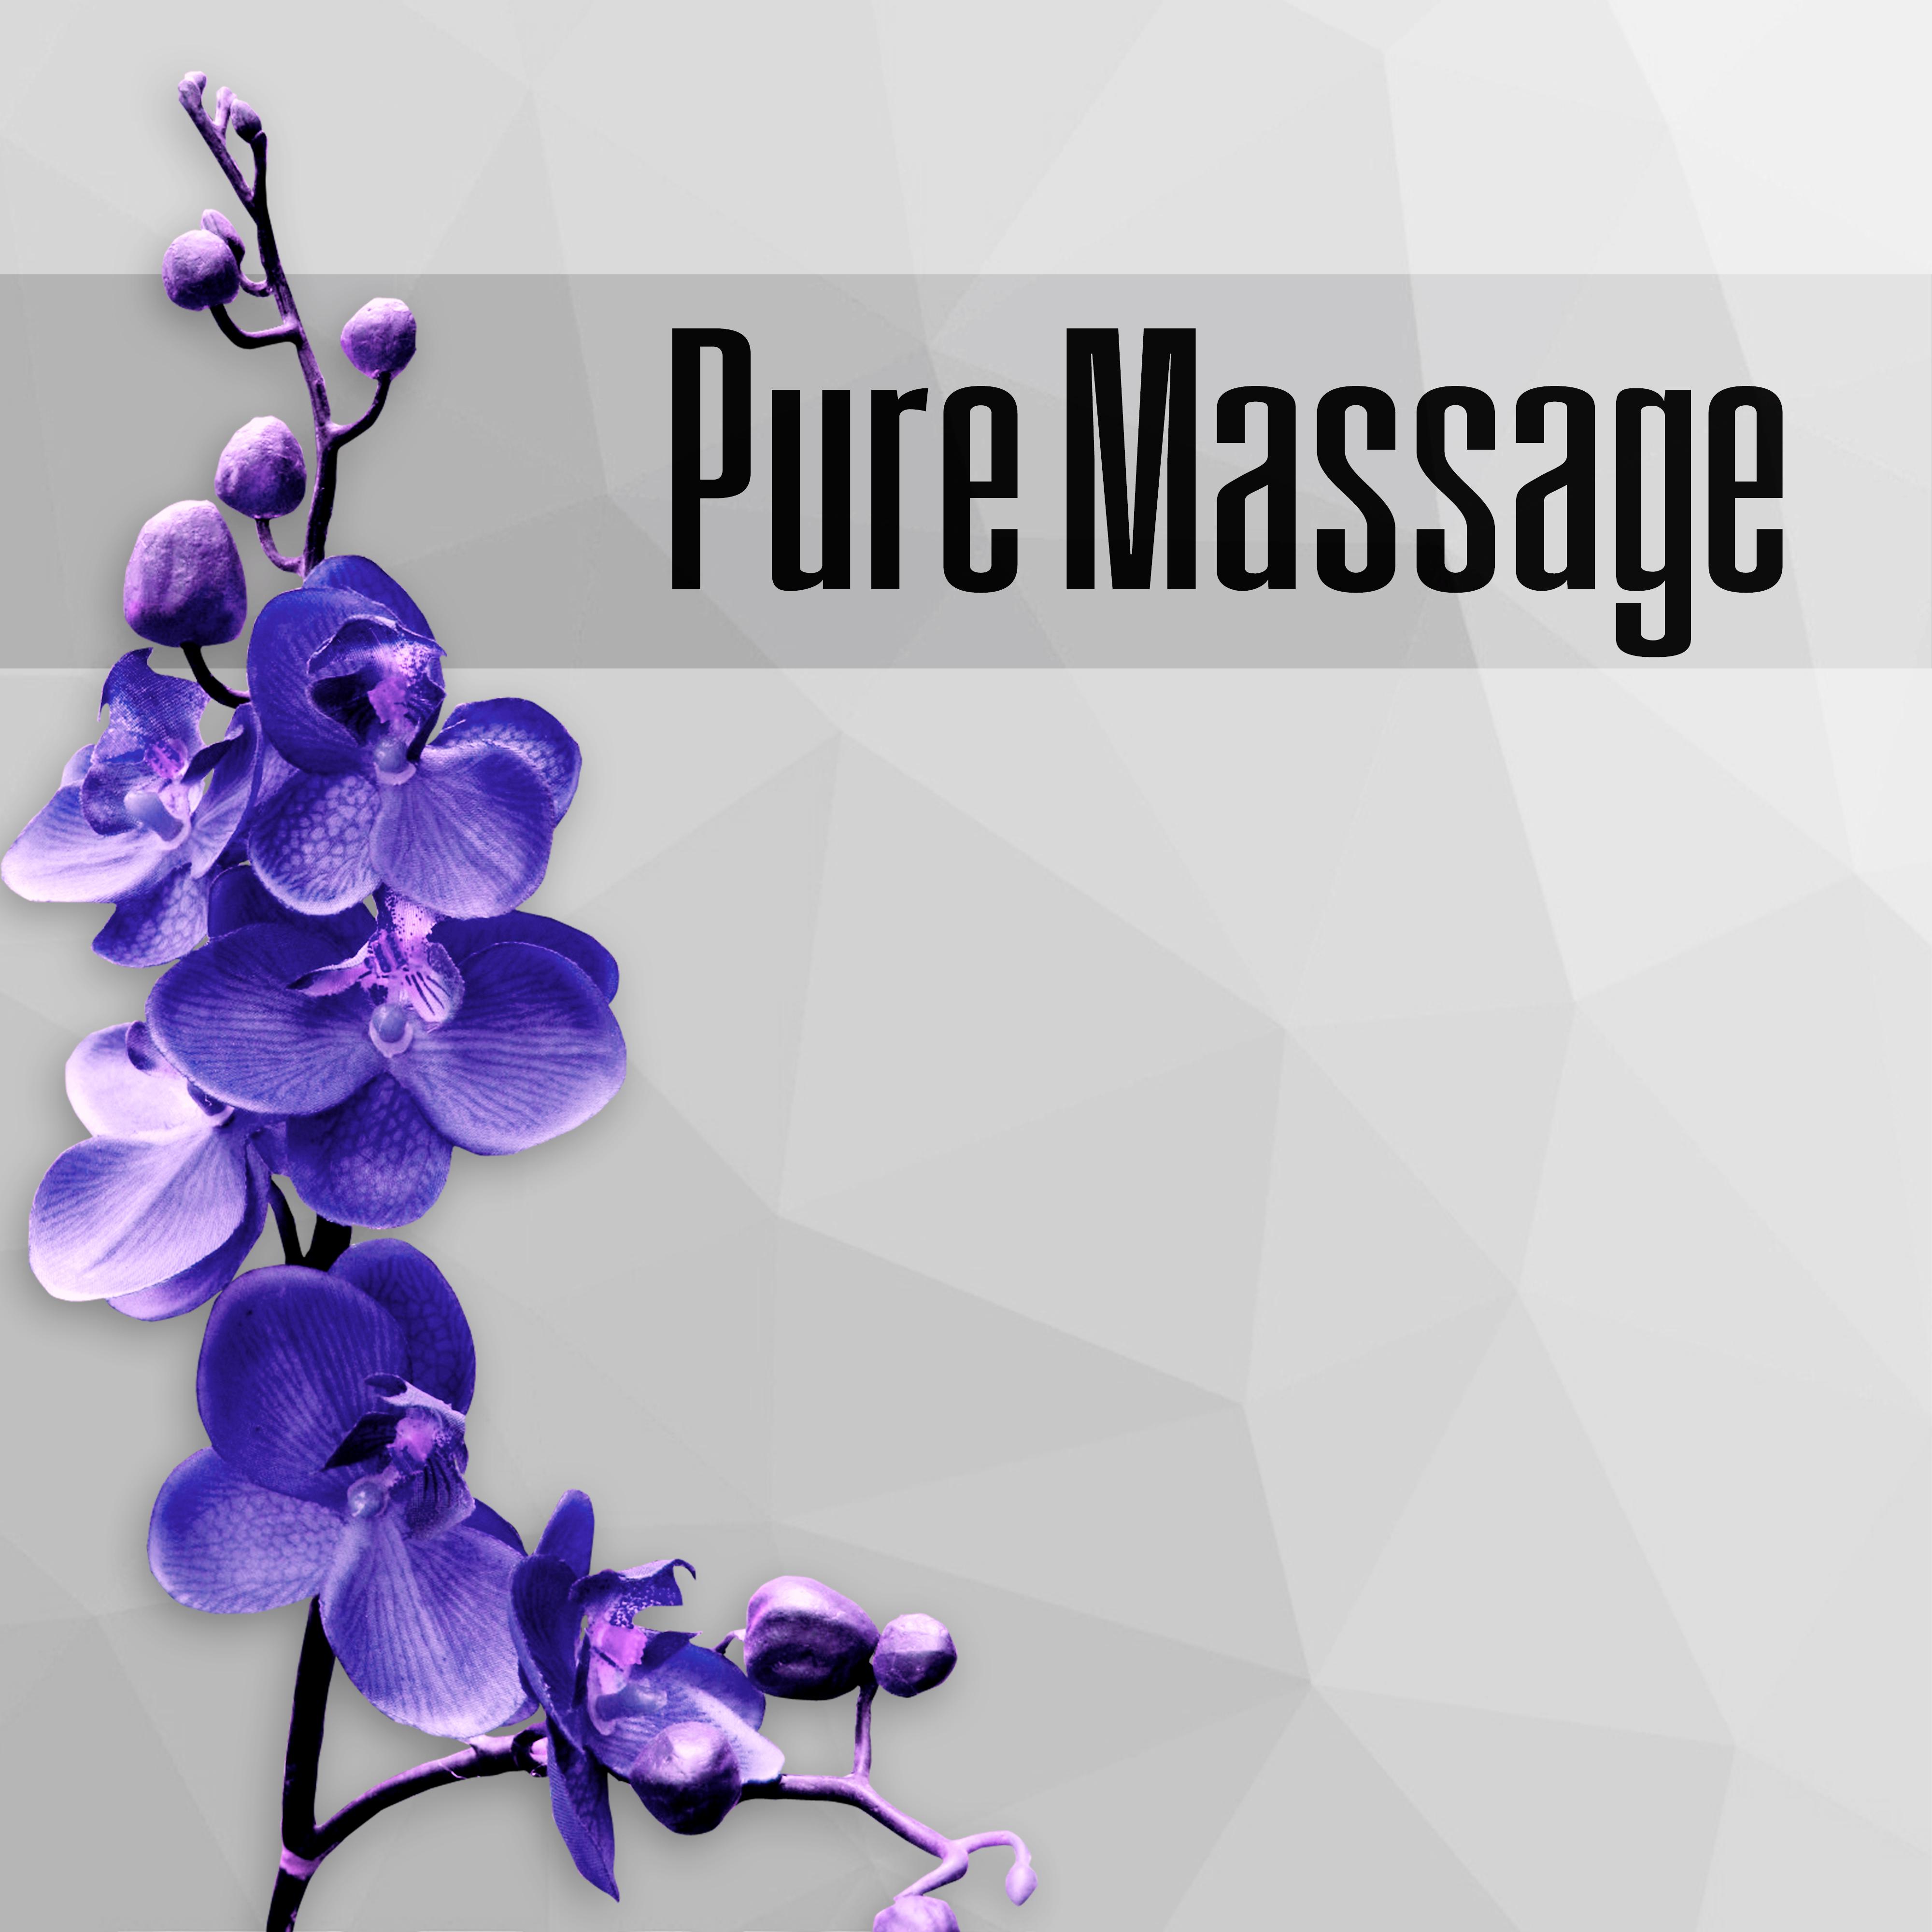 Pure Massage  - Music for Healing Touch, Massage Therapy, Natural Sounds, Sensual Massage Music for Aromatherapy, Spa Massage